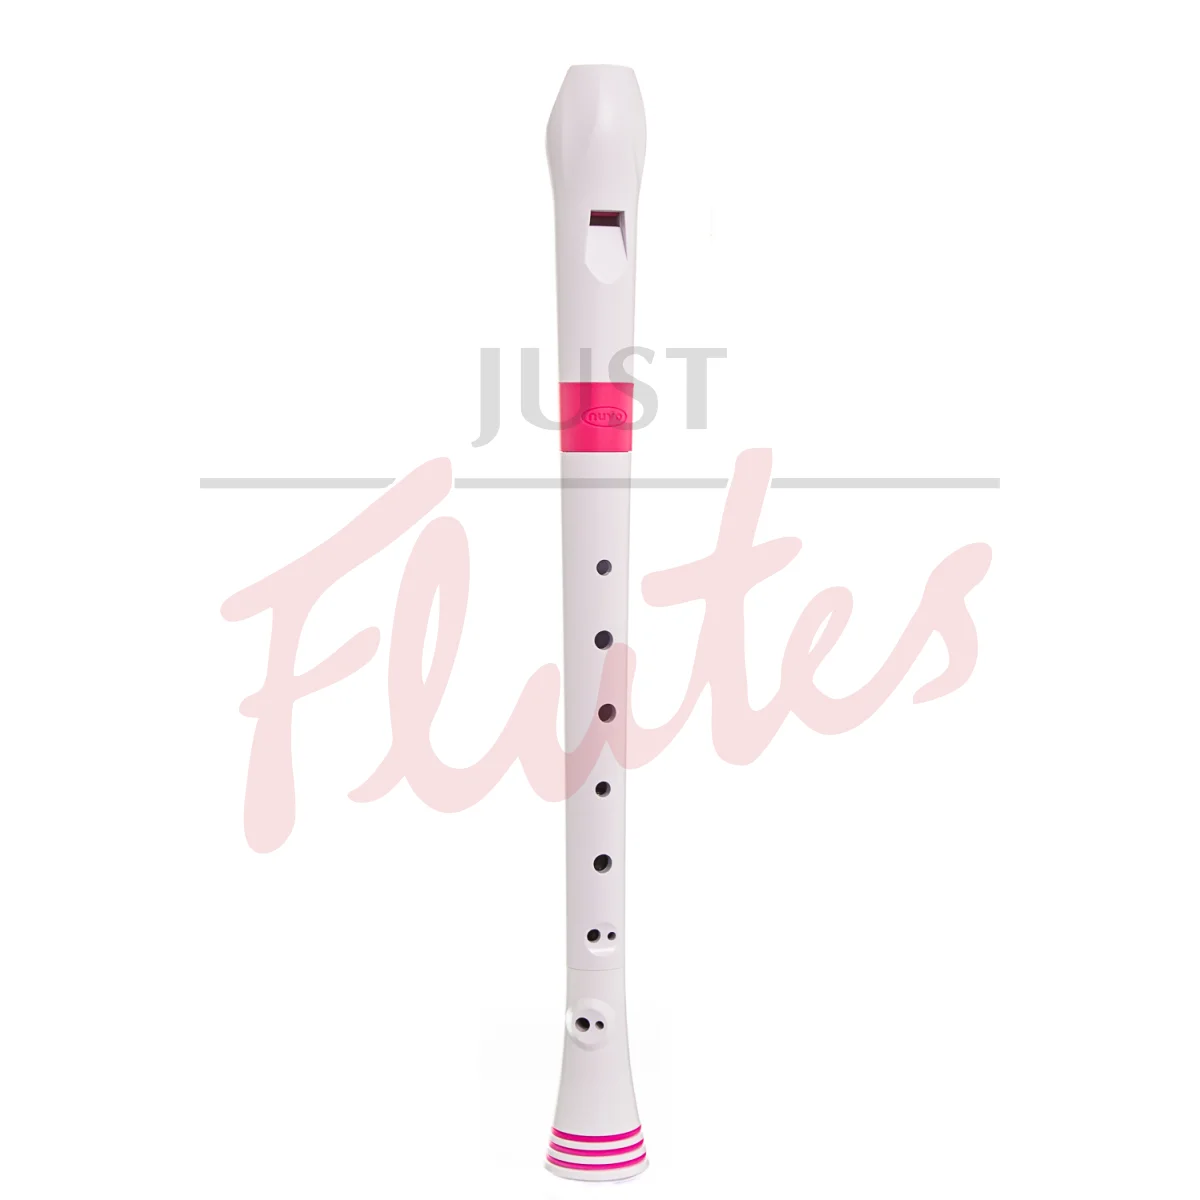 Nuvo N310RDPK Recorder, White with Pink Trim